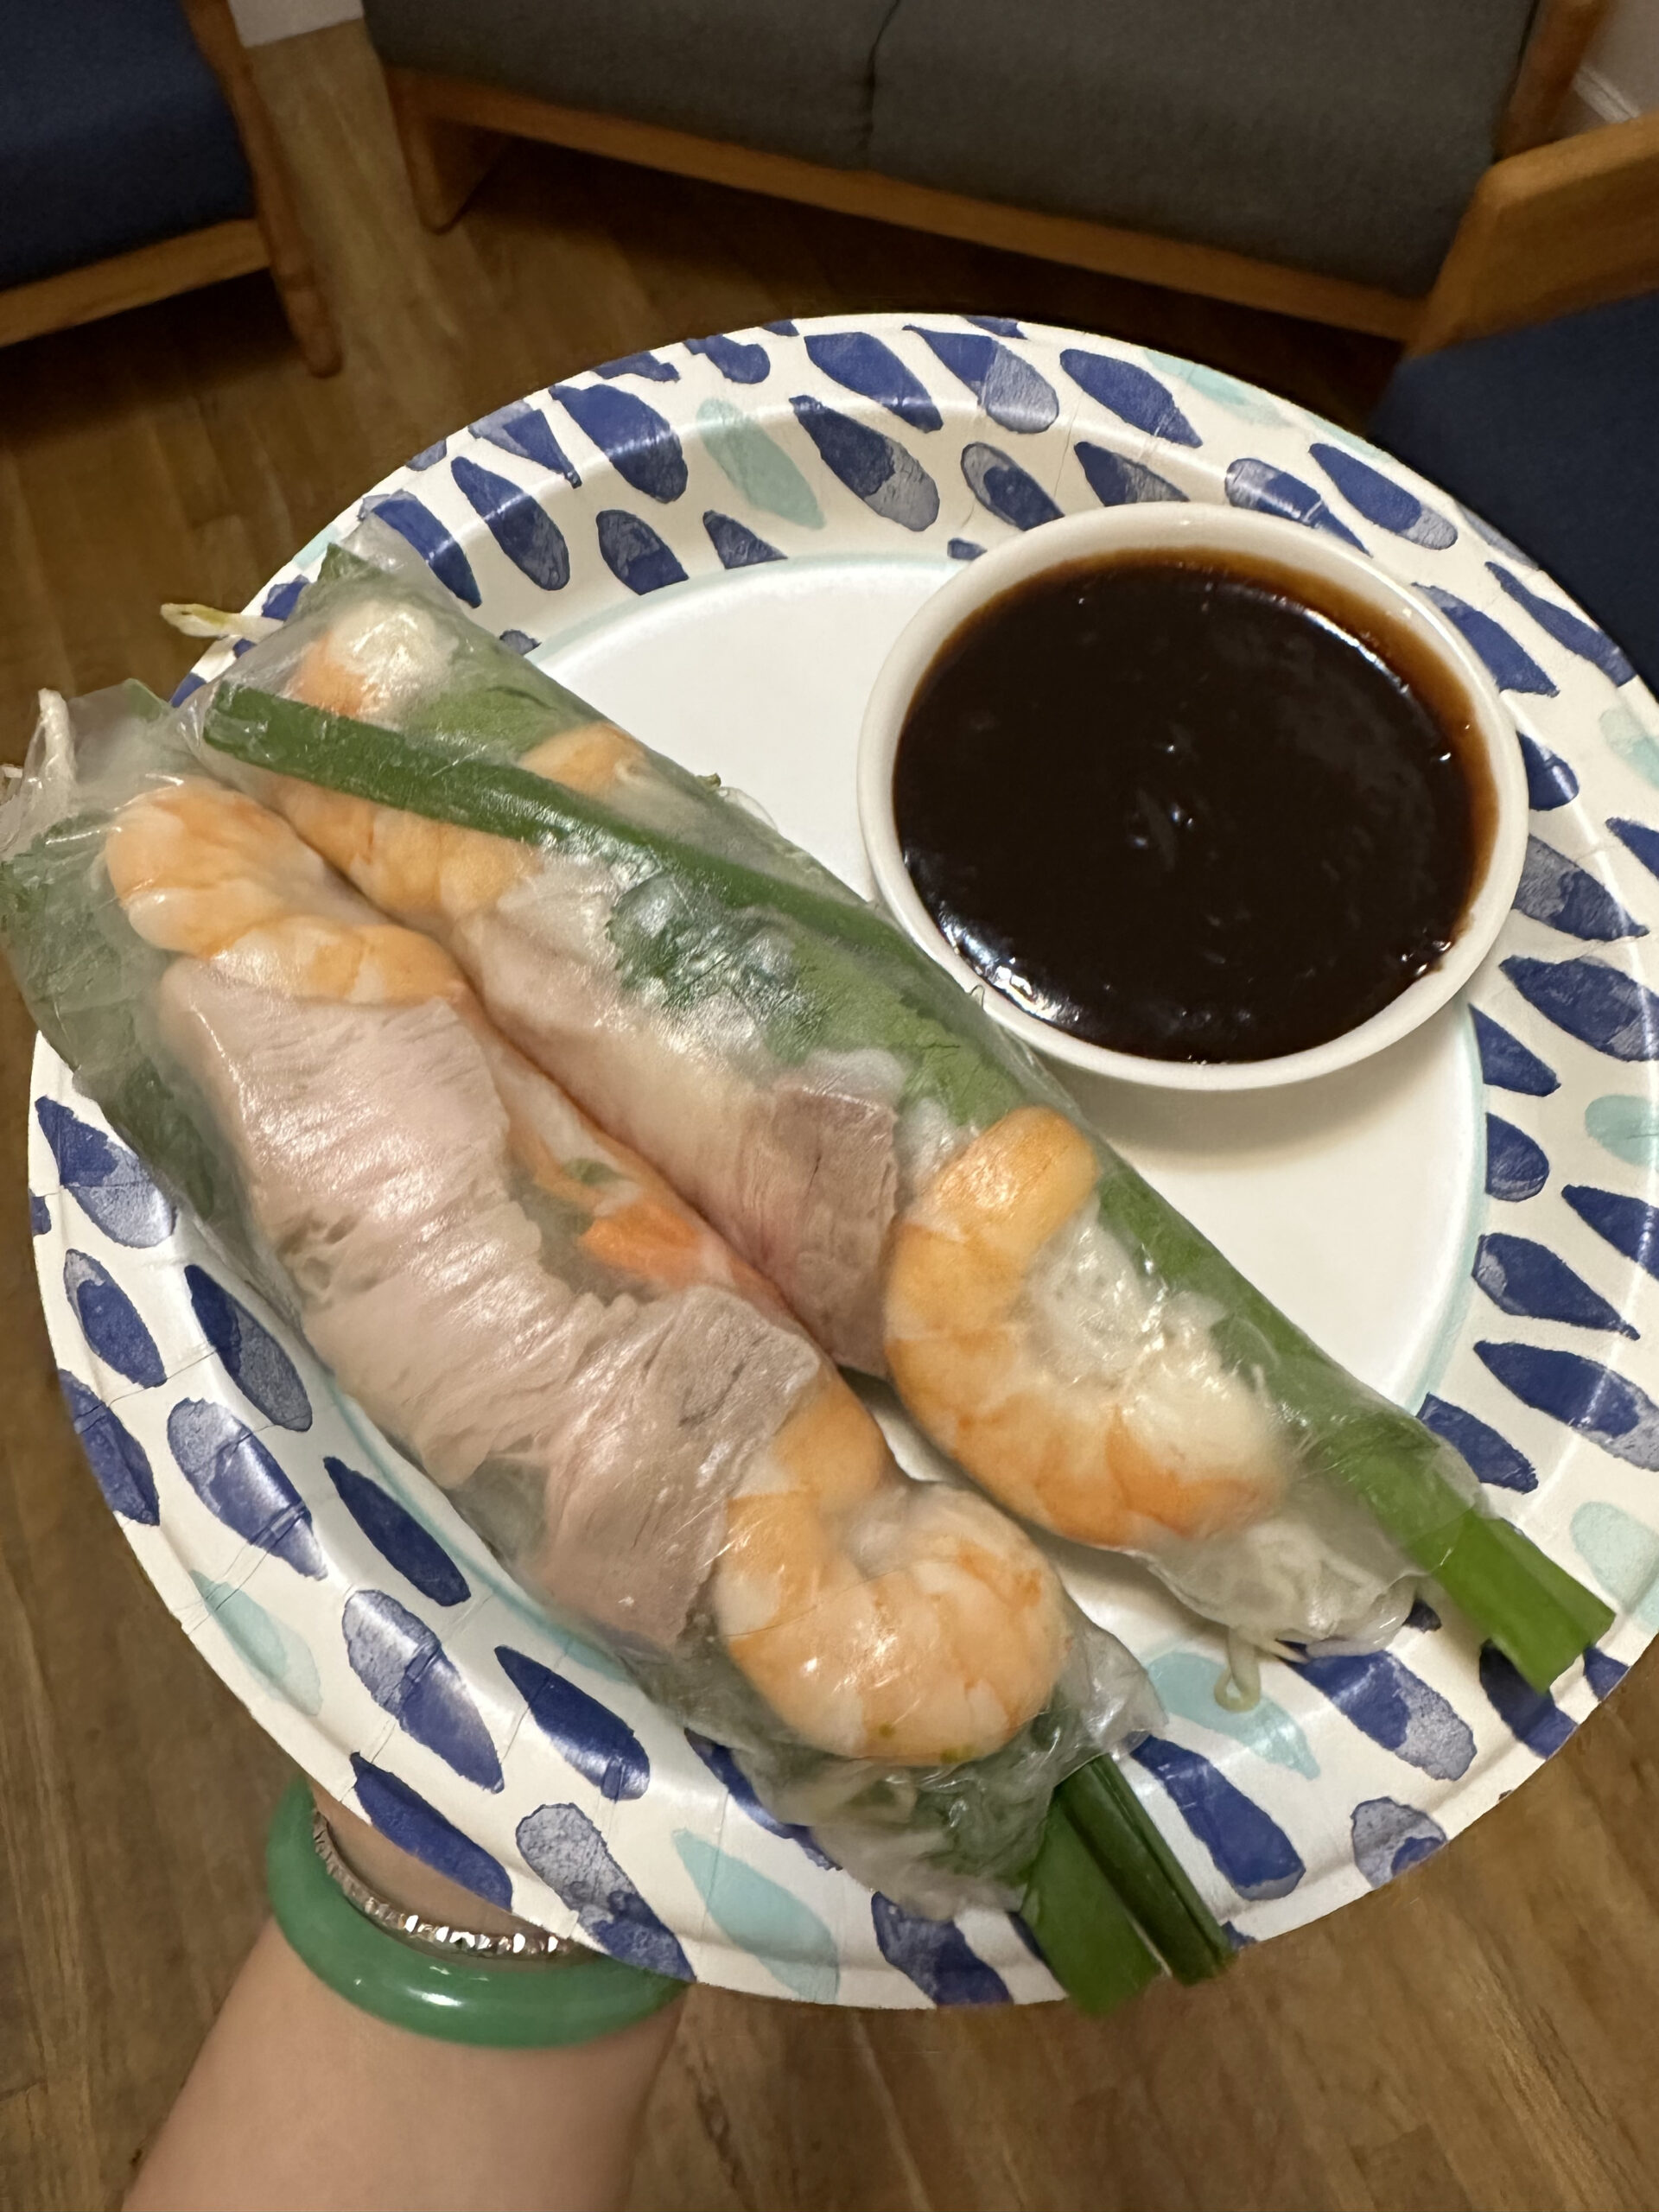 Two summer rolls on a plate next to a small bowl of hoisin sauce.